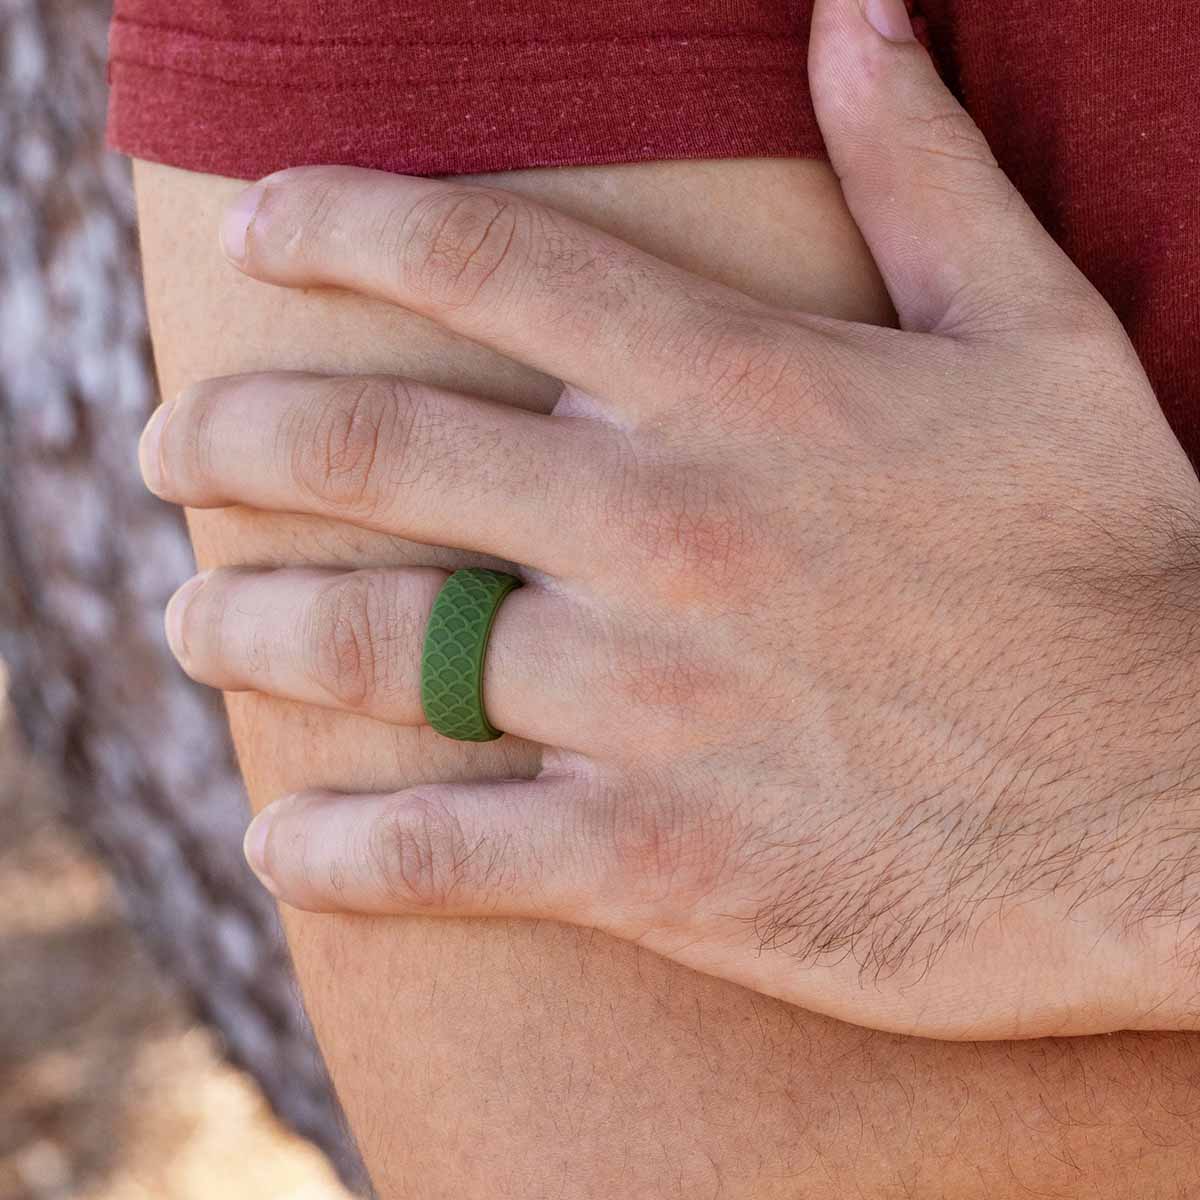 Unique green silicone wedding ring on male hand